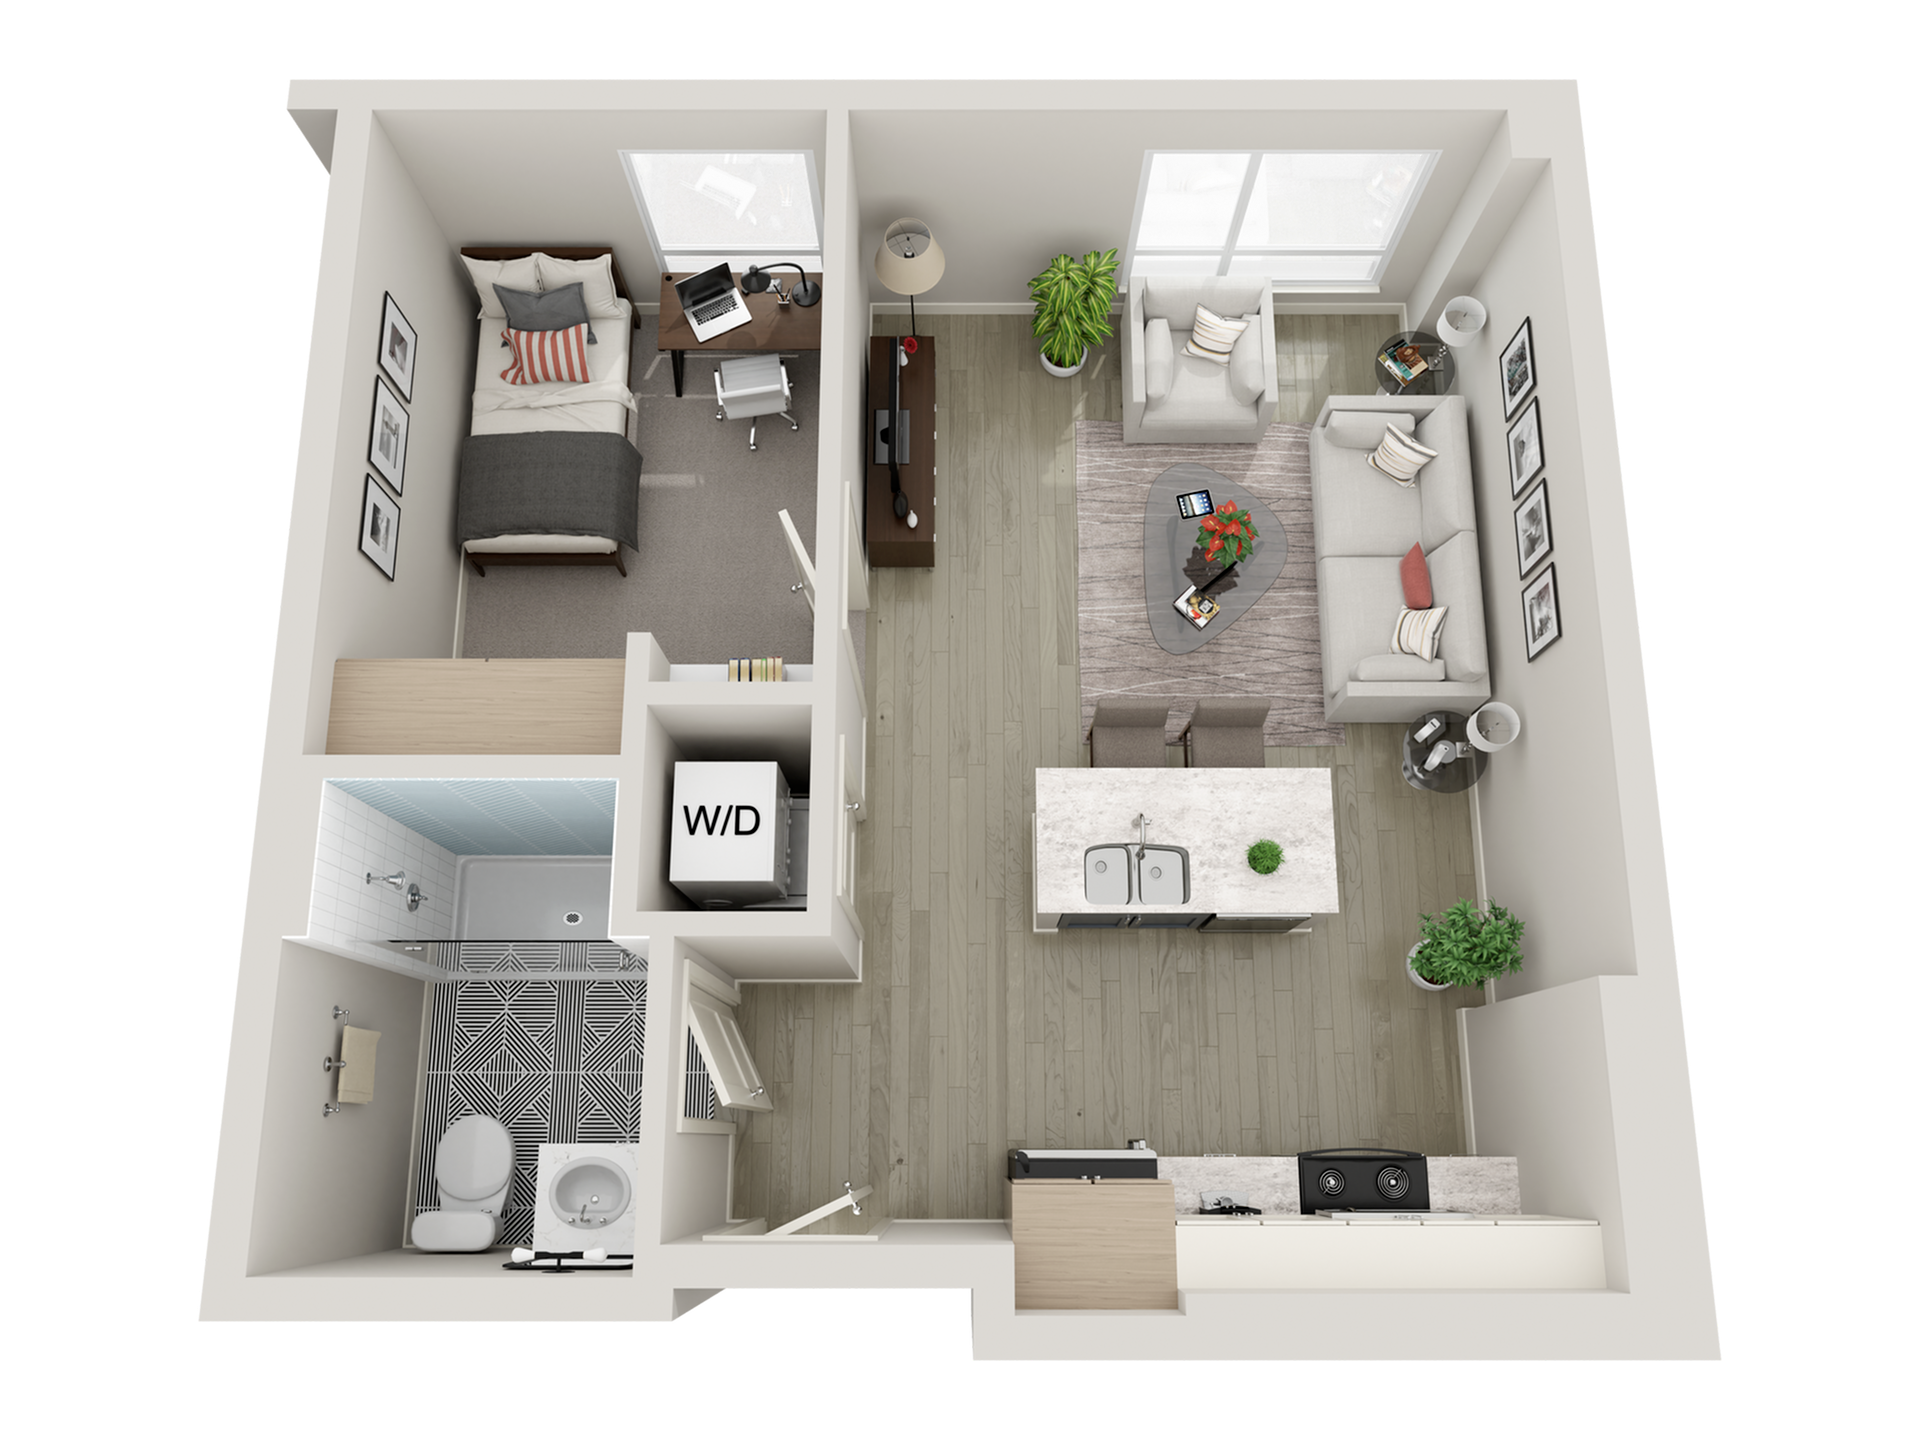 1 bedroom floorplan with a bed, desk, kitchen and island, full bathroom, closet, and washer dryer.